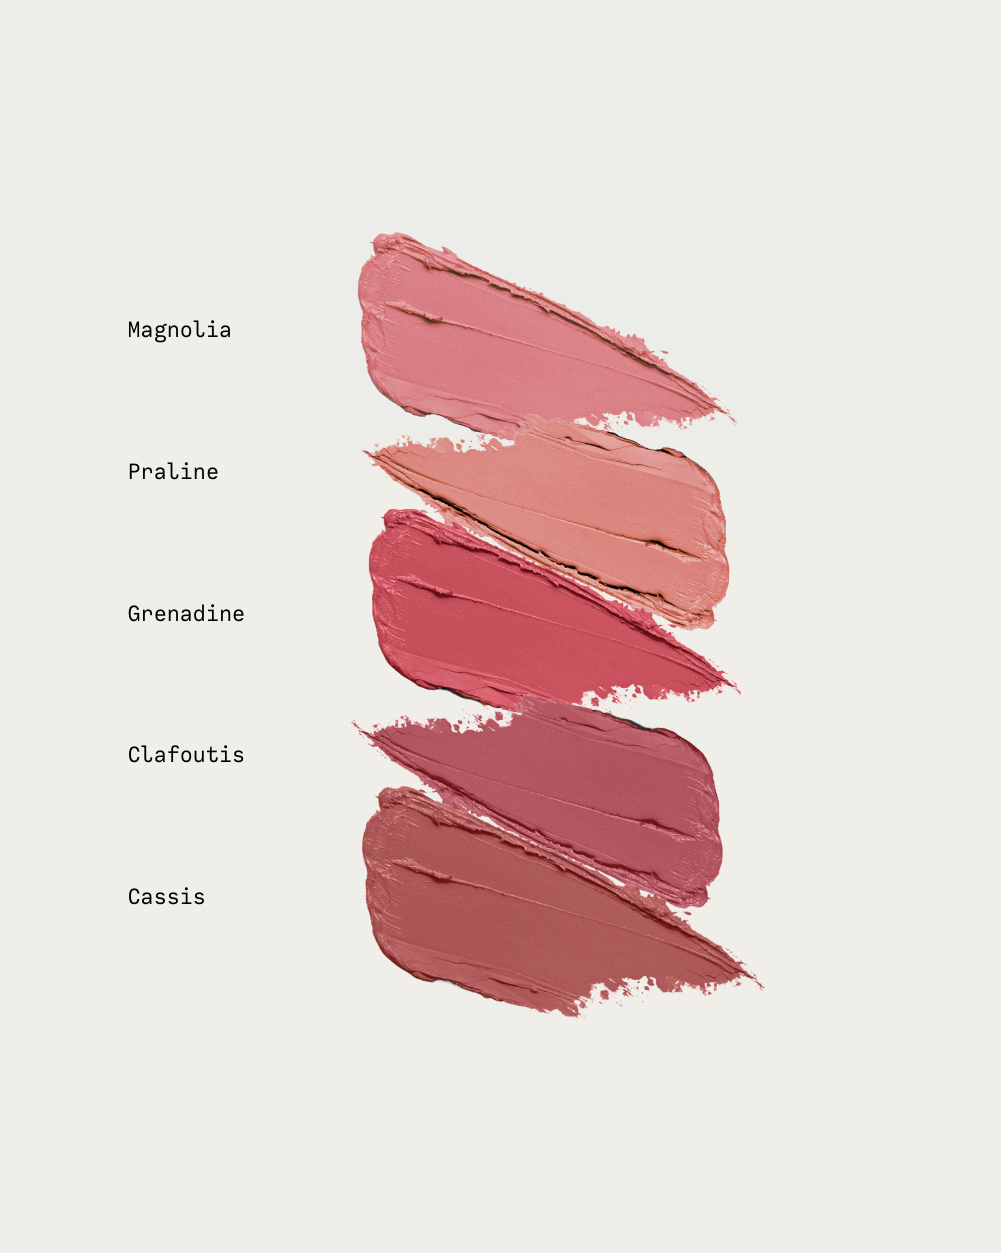 SWATCHES_12_24013a80-6bc4-41dc-b154-02471dbd976c.png